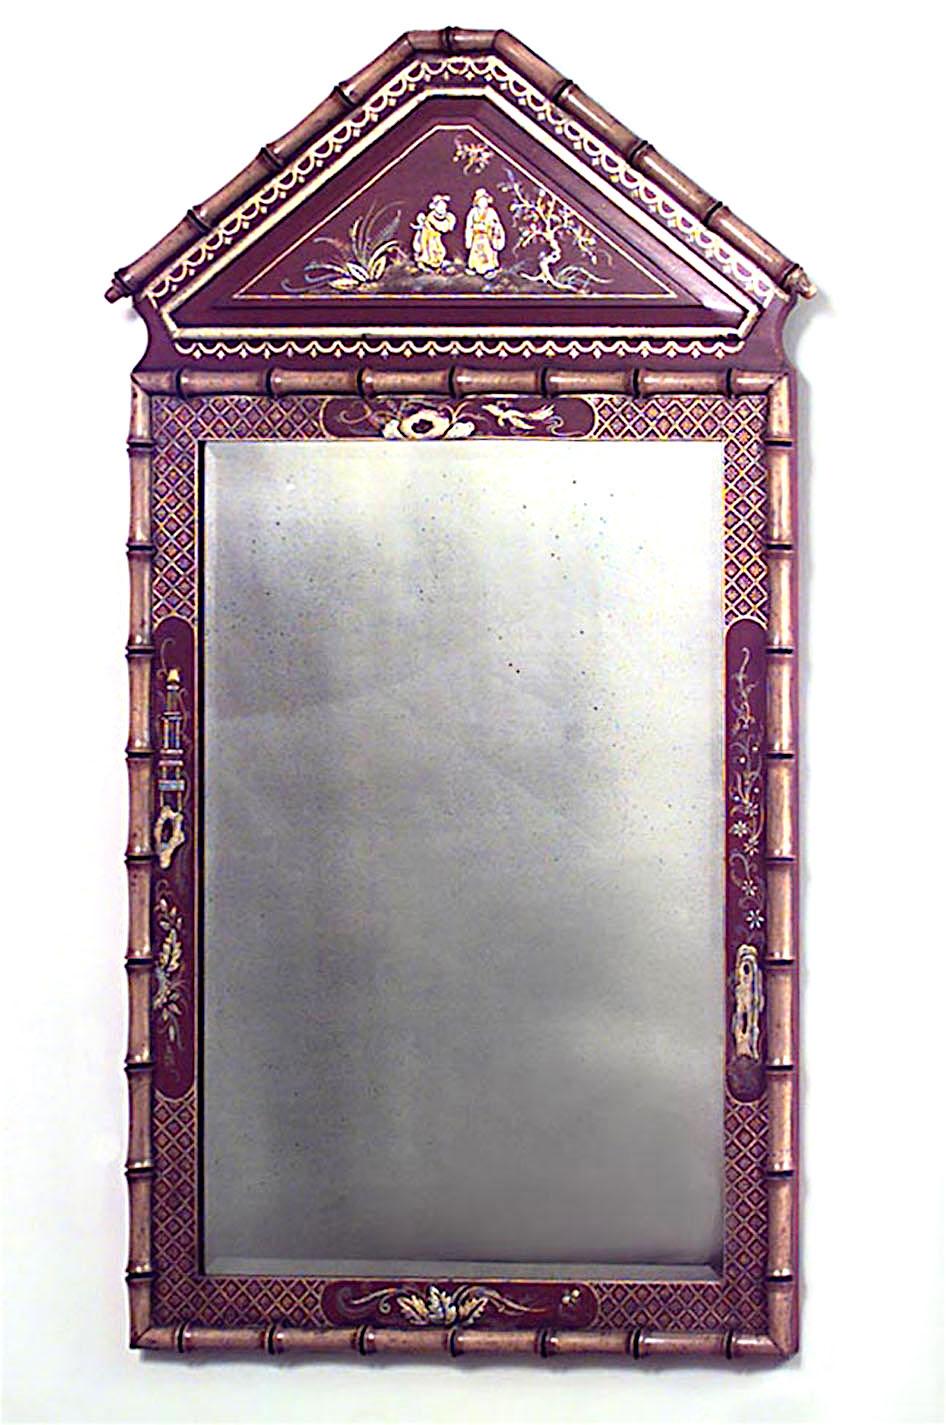 English Regency style faux bamboo wall mirror with pediment top and red lacquered chinoiserie decorated border (20th centry).
  